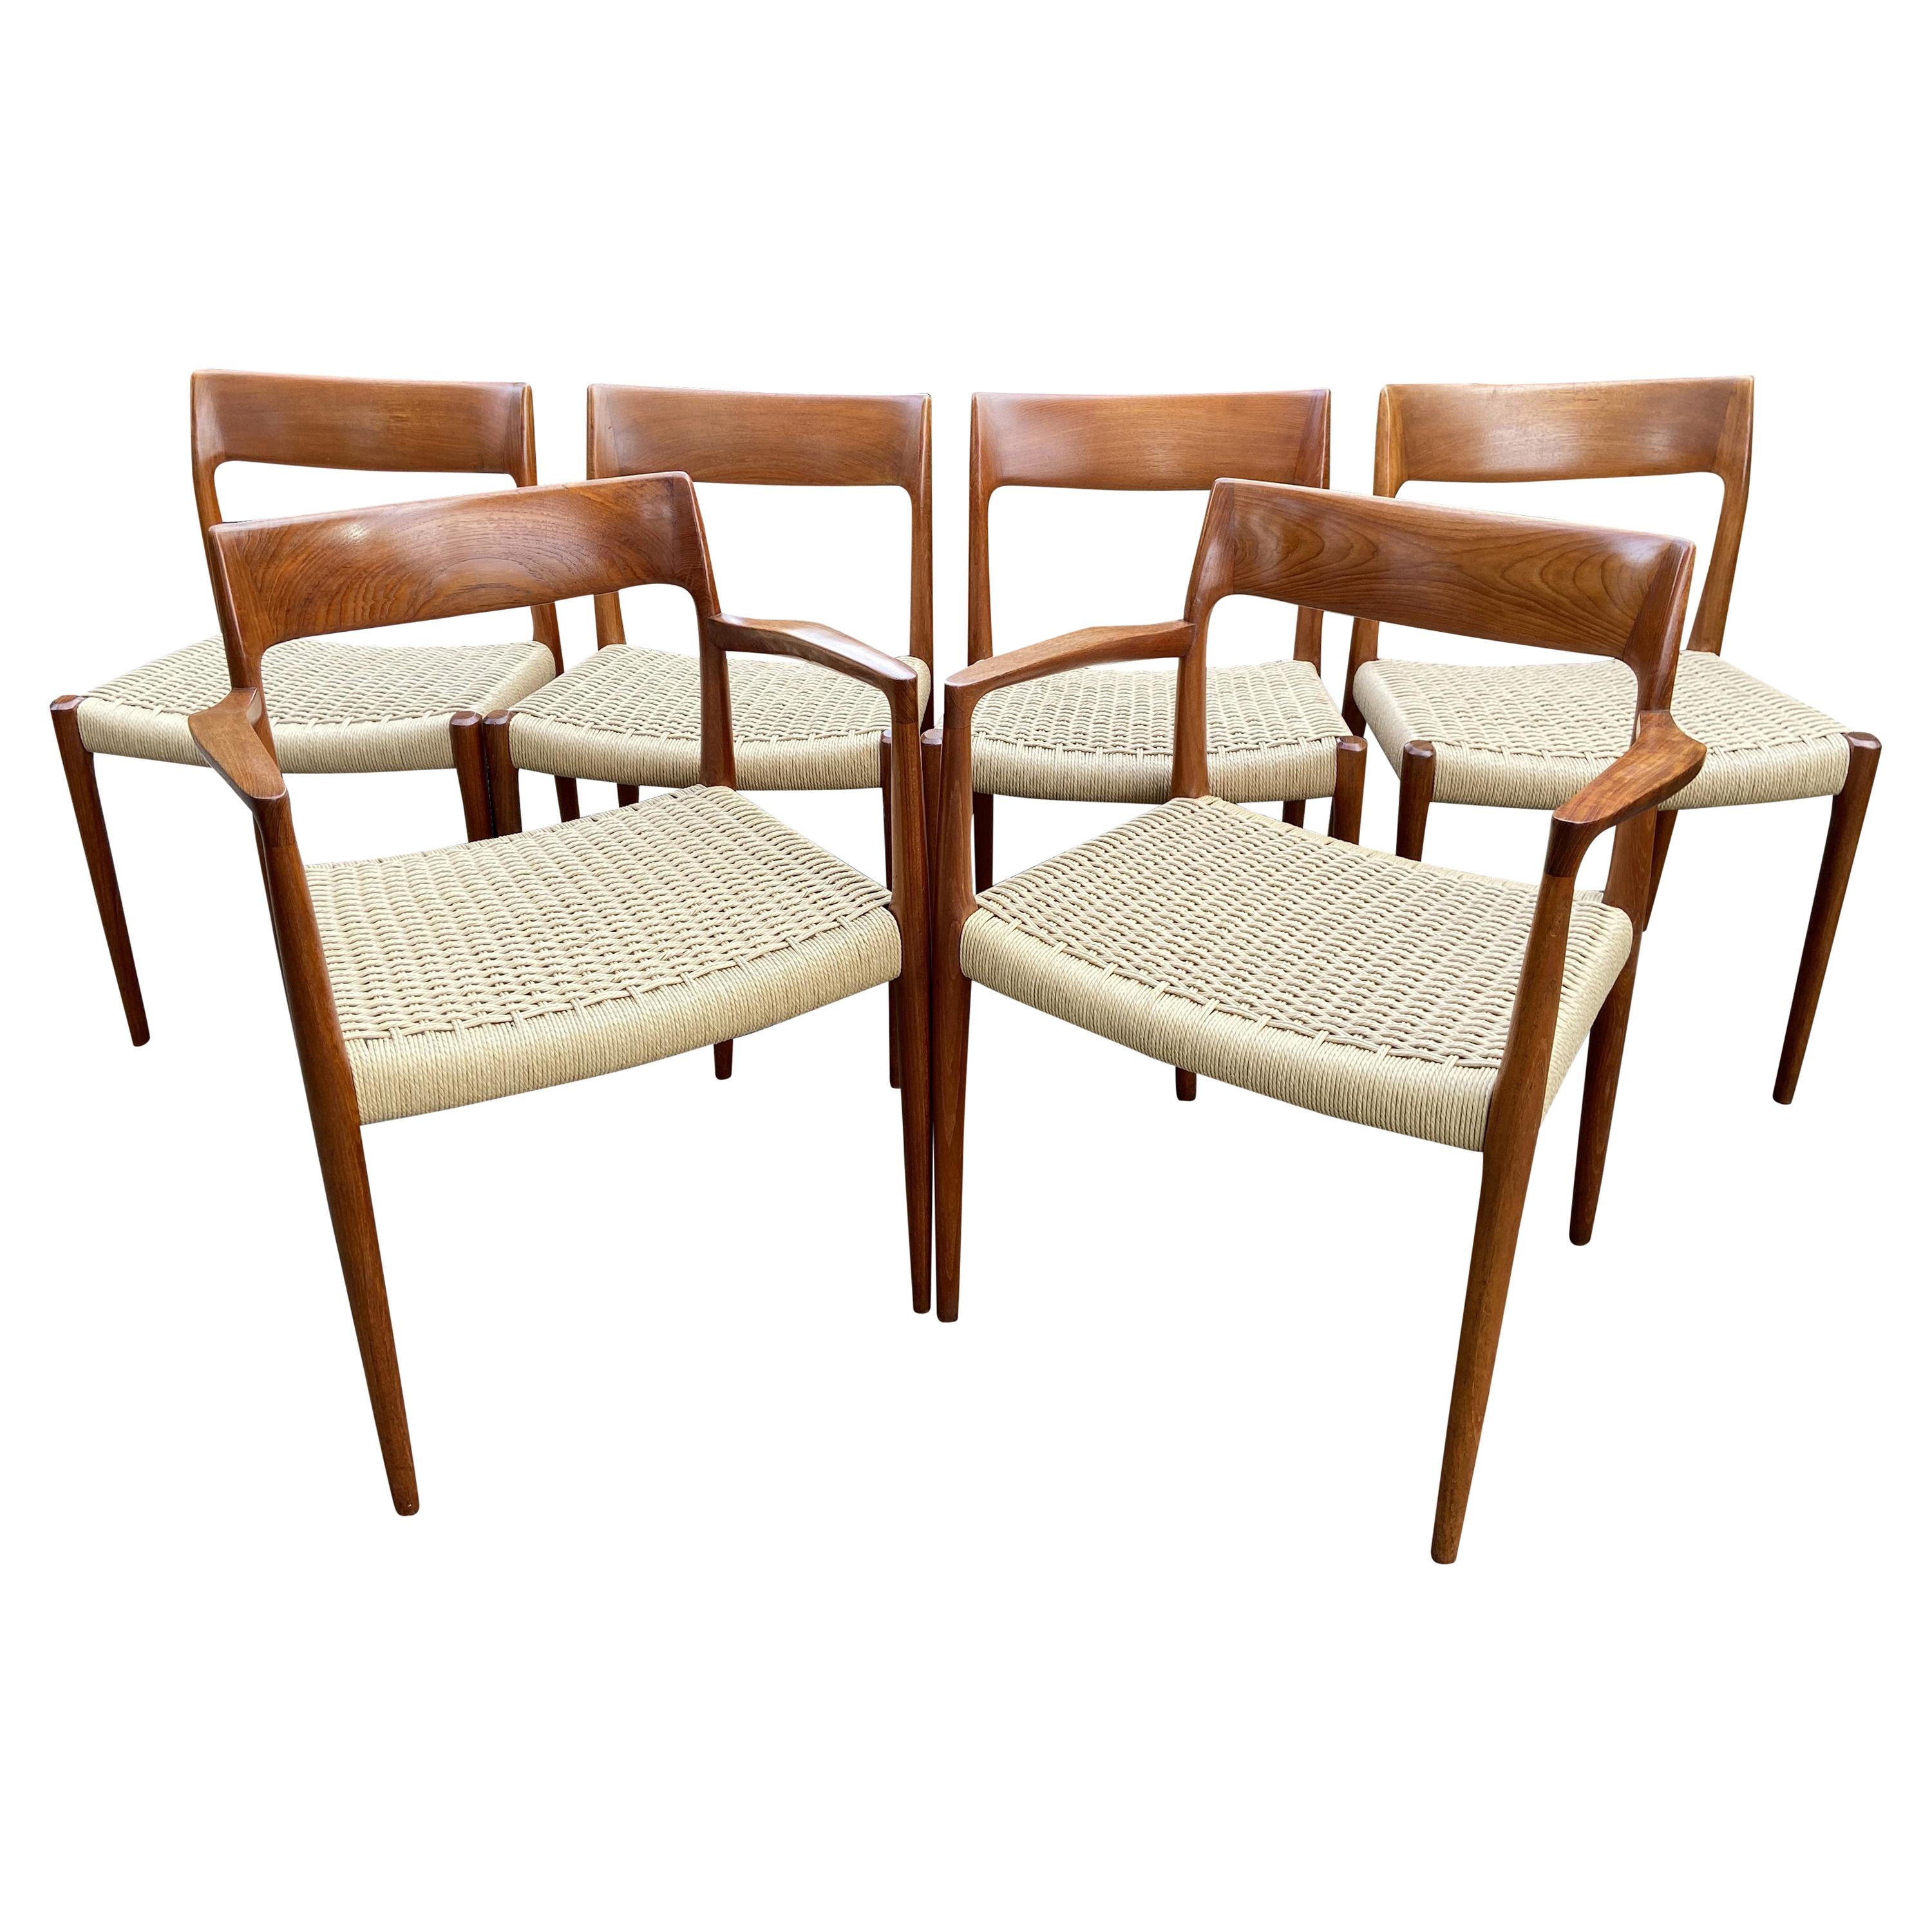 Set of 6 Teak and Papercord Dining Chairs by Niels O. Moller for J. L. Moller